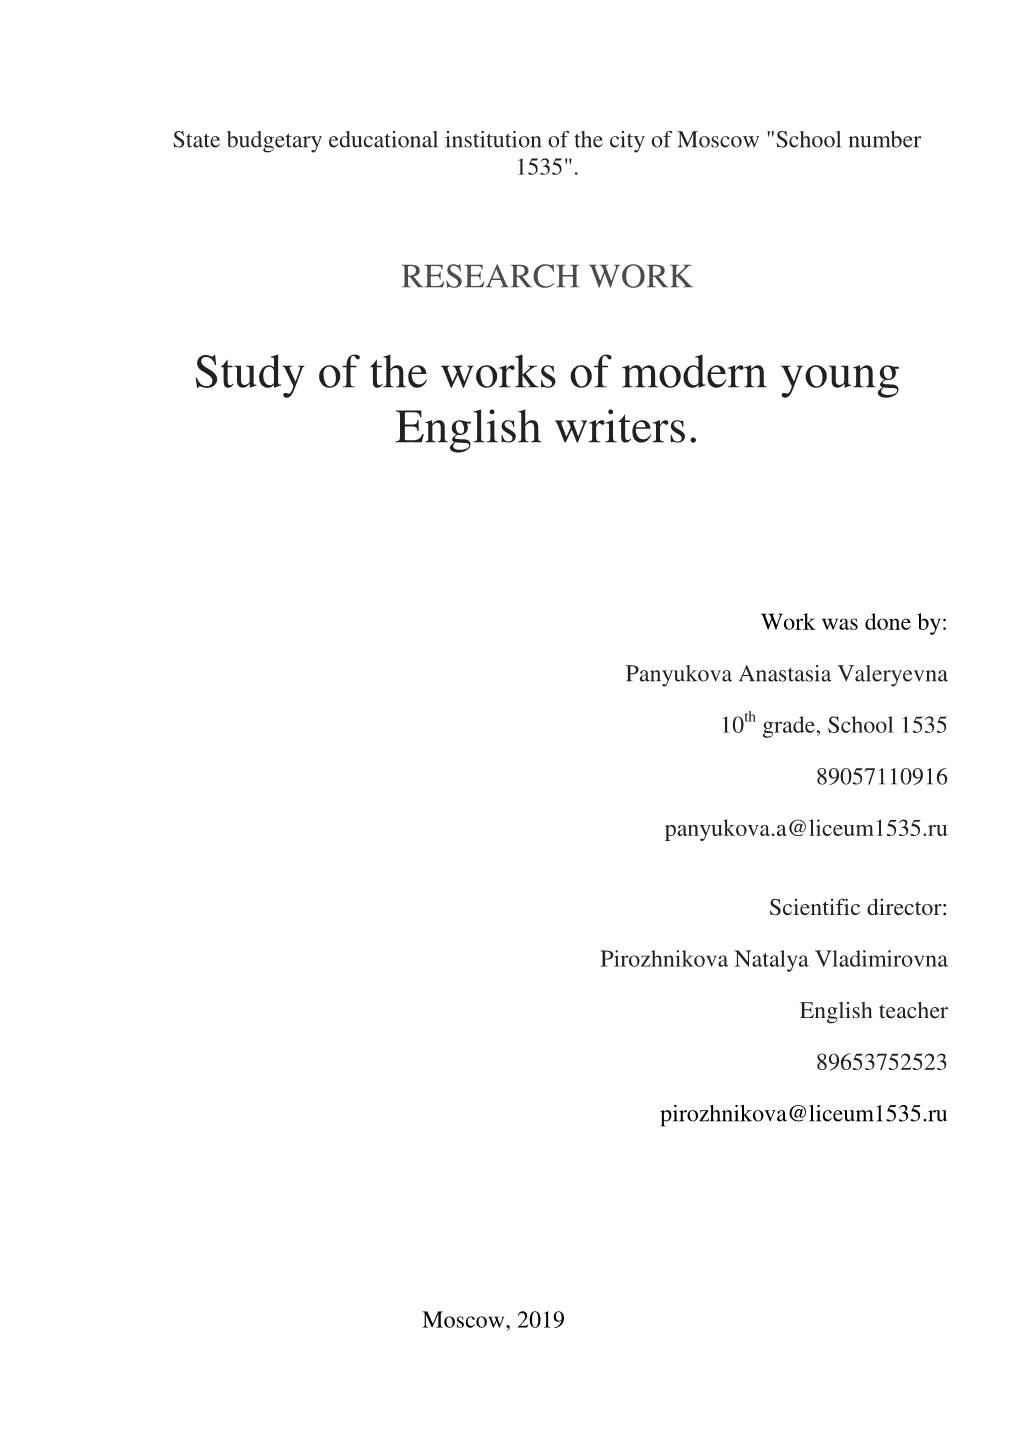 Study of the Works of Modern Young English Writers